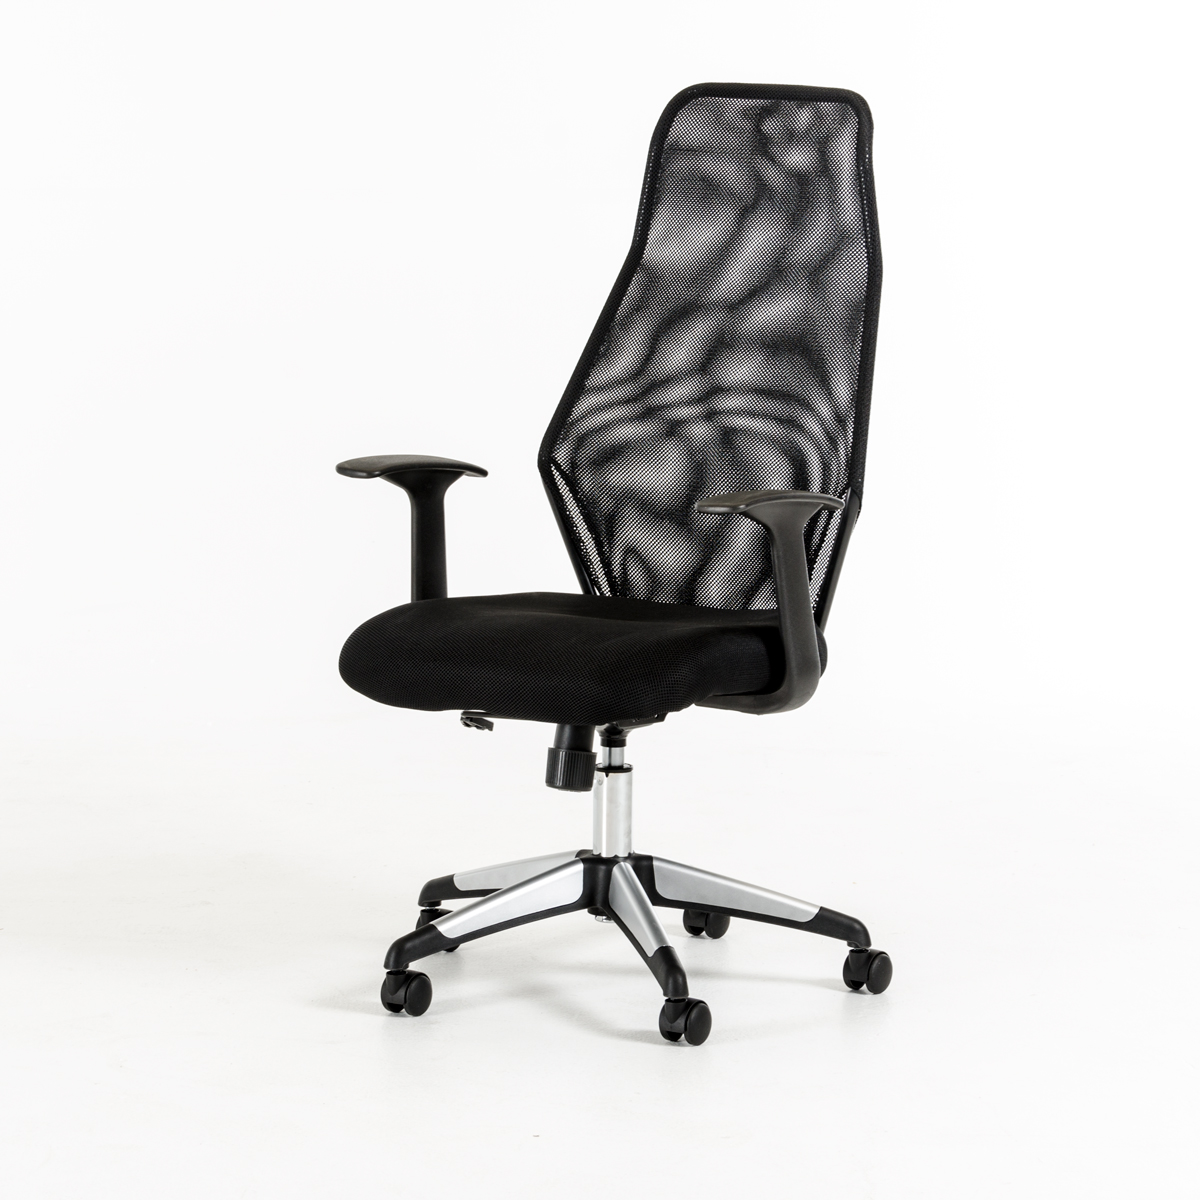 48" Black Plastic and Steel Office Chair